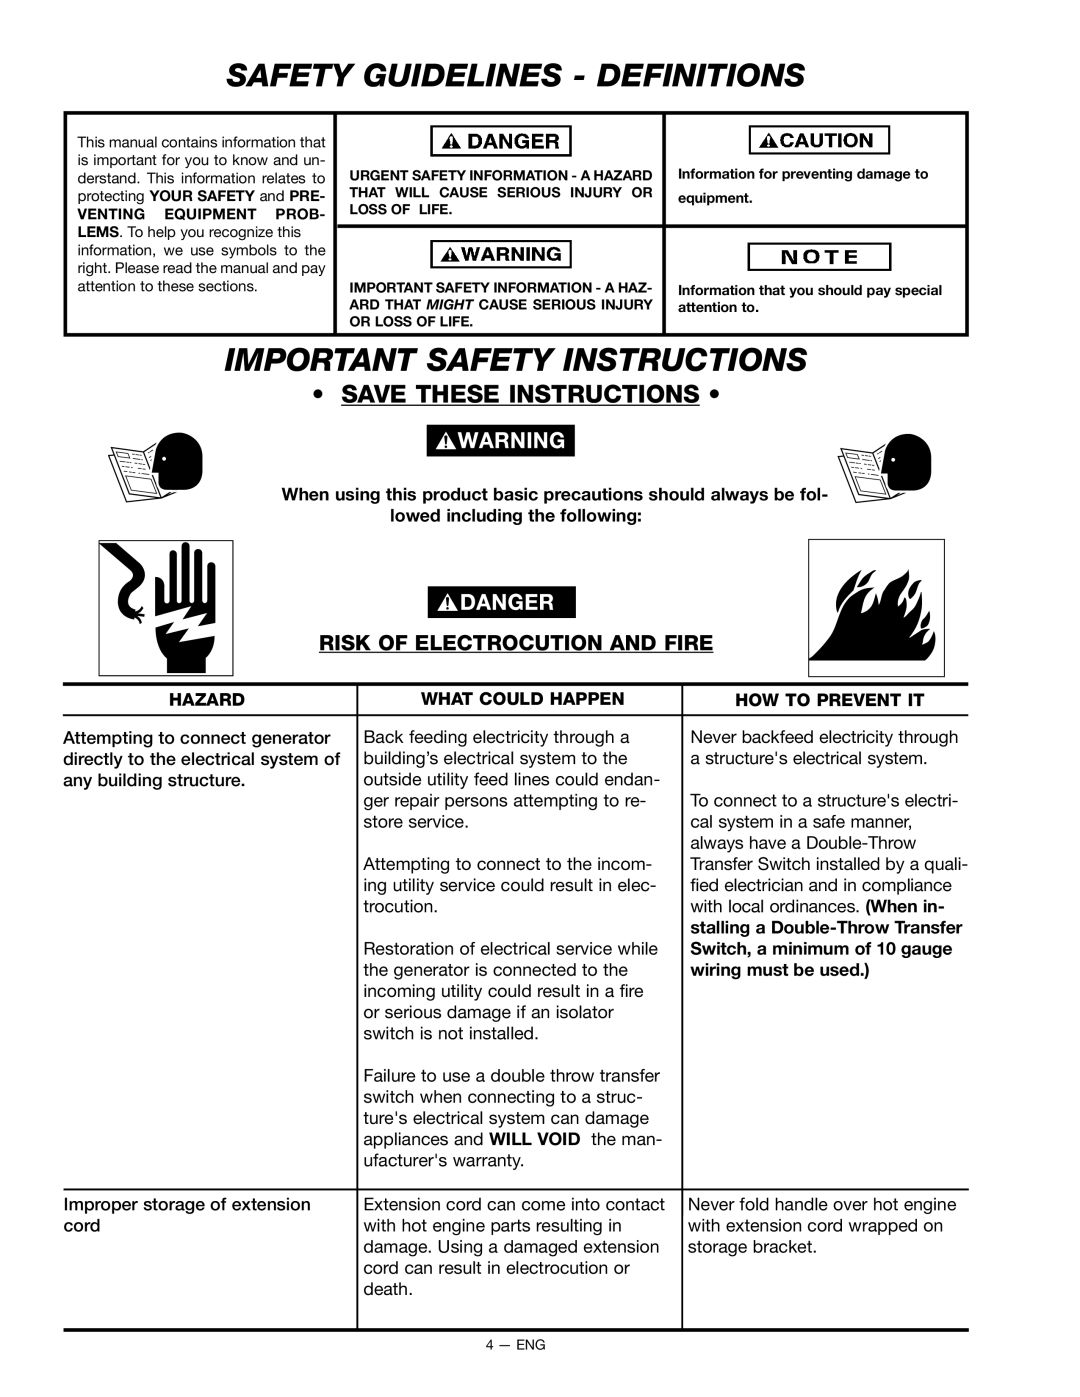 Porter-Cable H451CS Safety Guidelines - Definitions, Important Safety Instructions, Save These Instructions, Hazard 